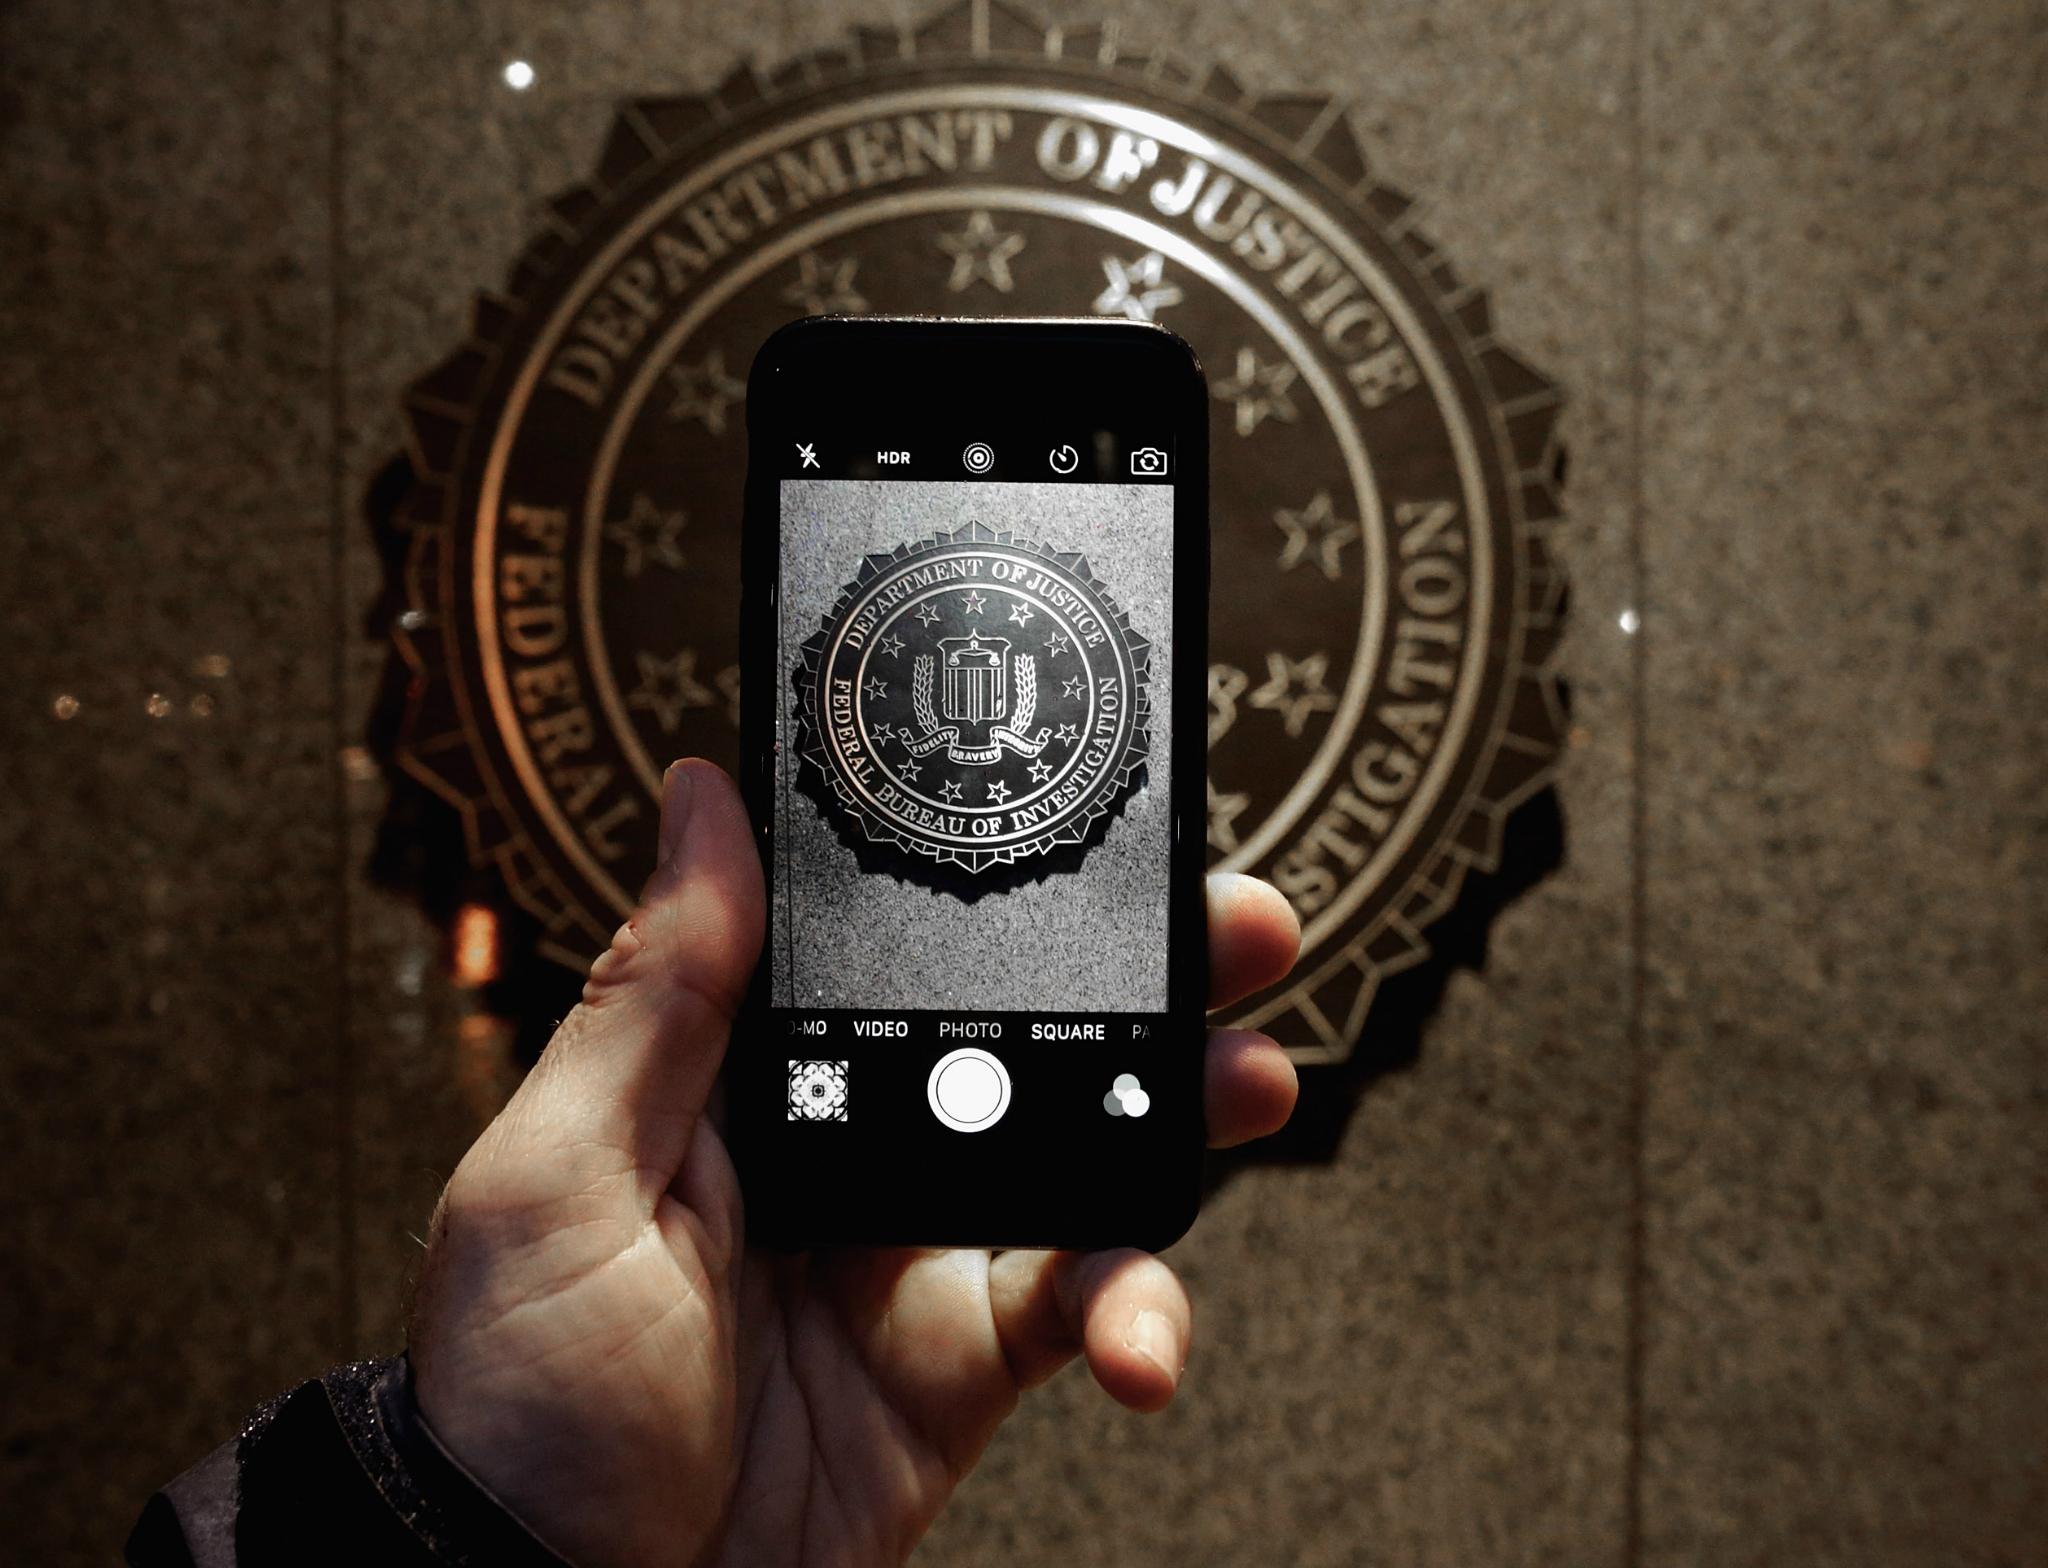 The official seal of the Federal Bureau of Investigation is seen on an iPhone's camera screen